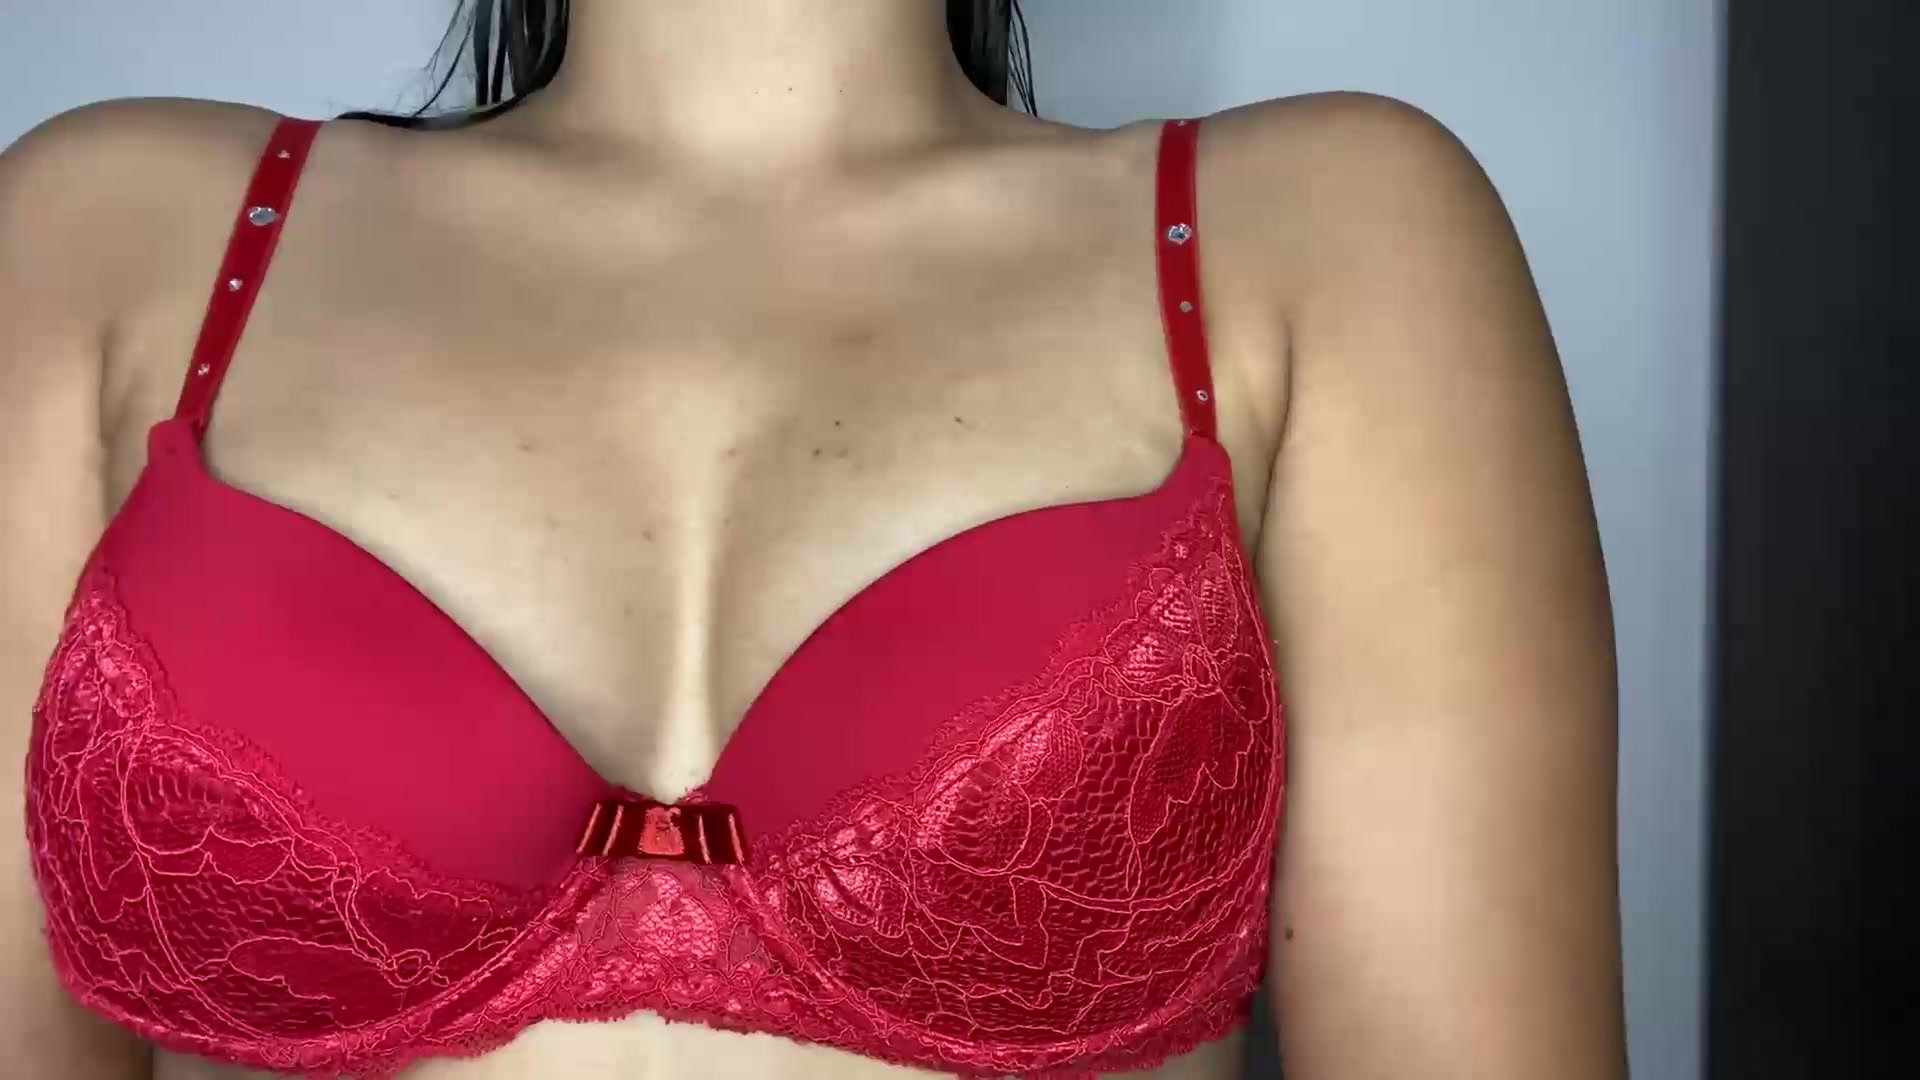 RED BRA WITH SHAKE BOOBS